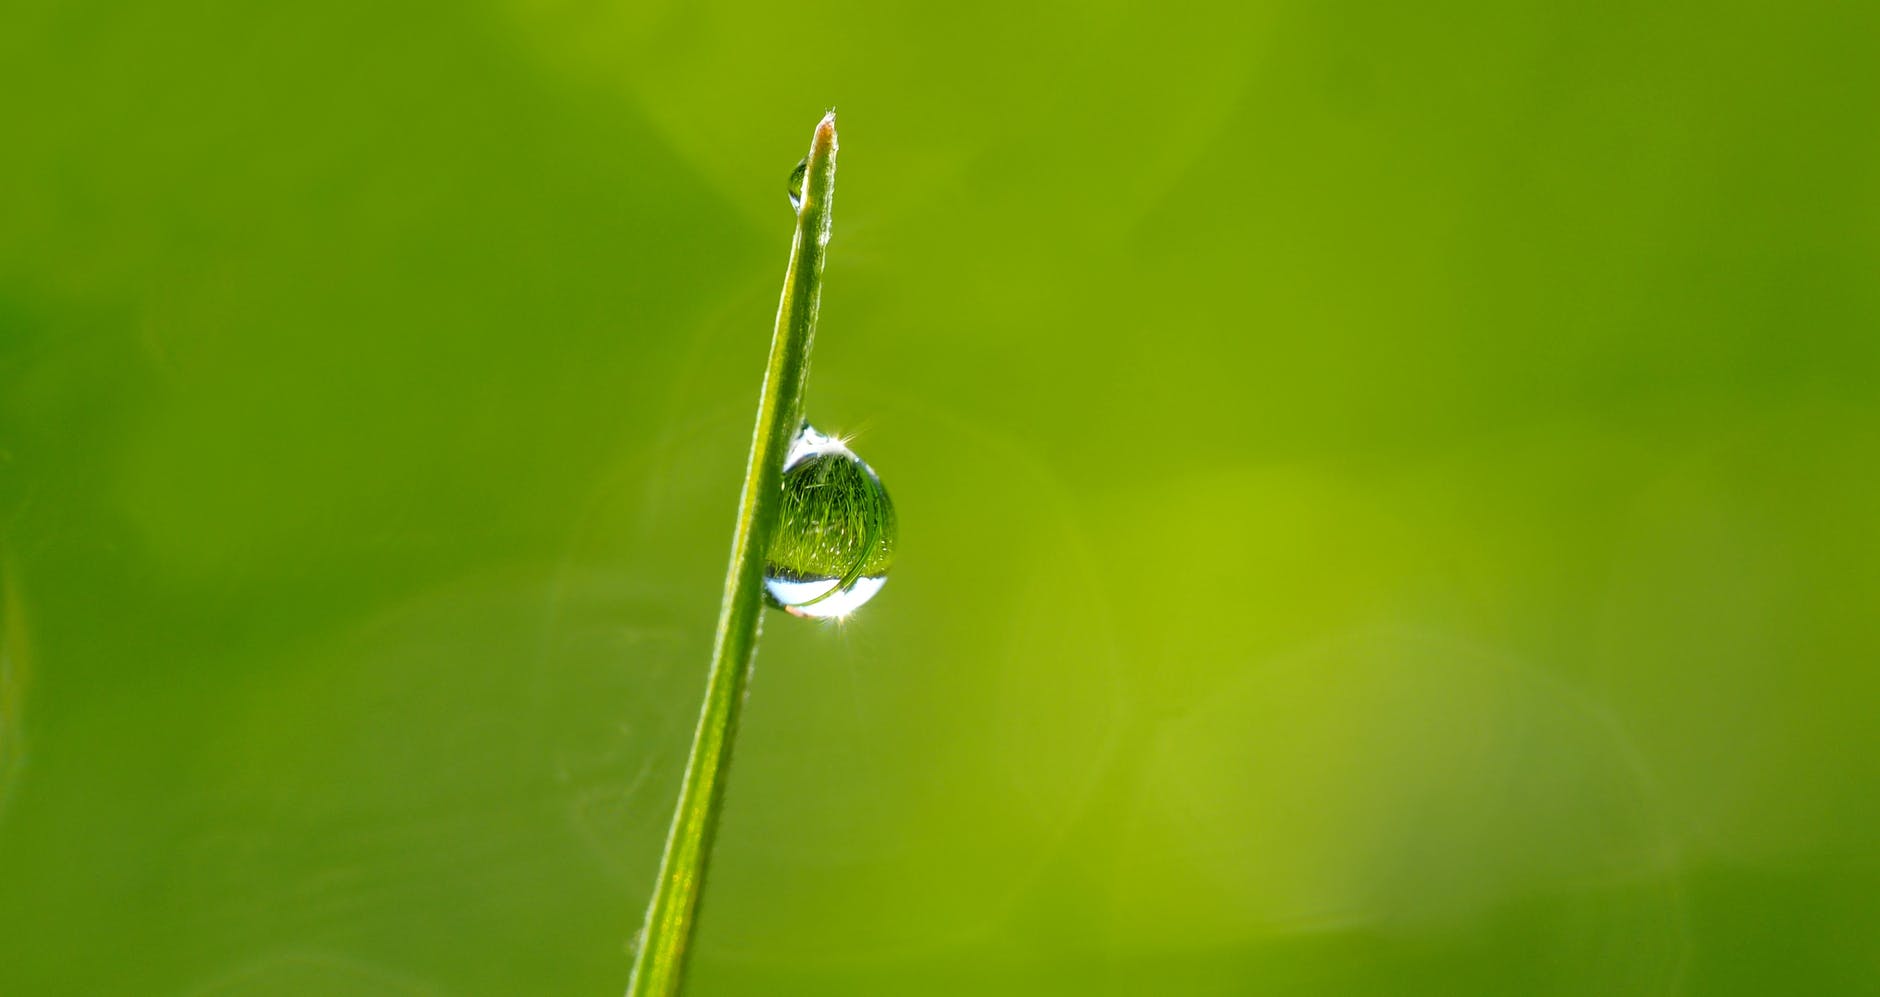 macro photography of droplet on green leaf during daytime